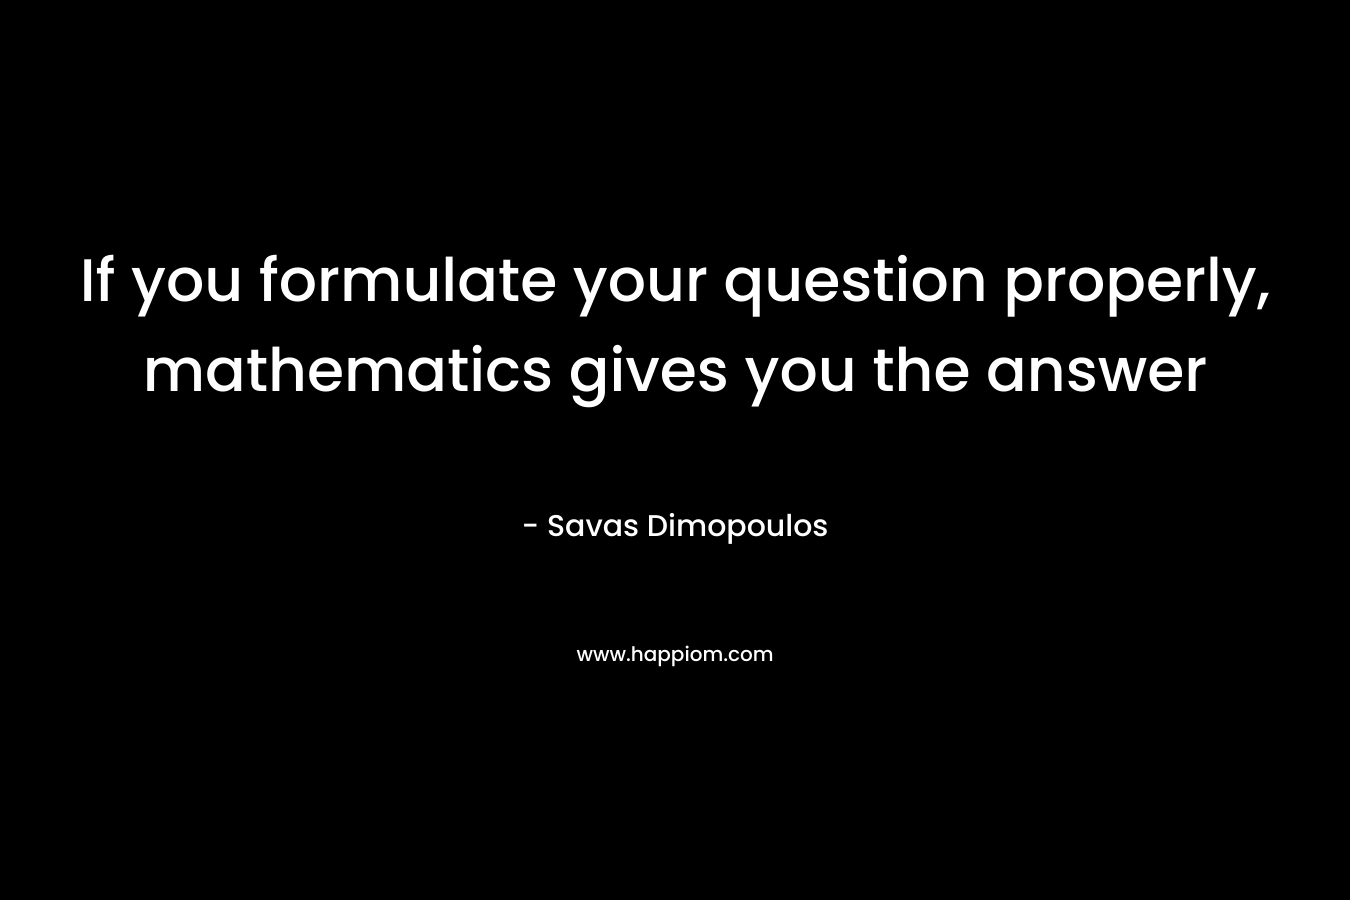 If you formulate your question properly, mathematics gives you the answer